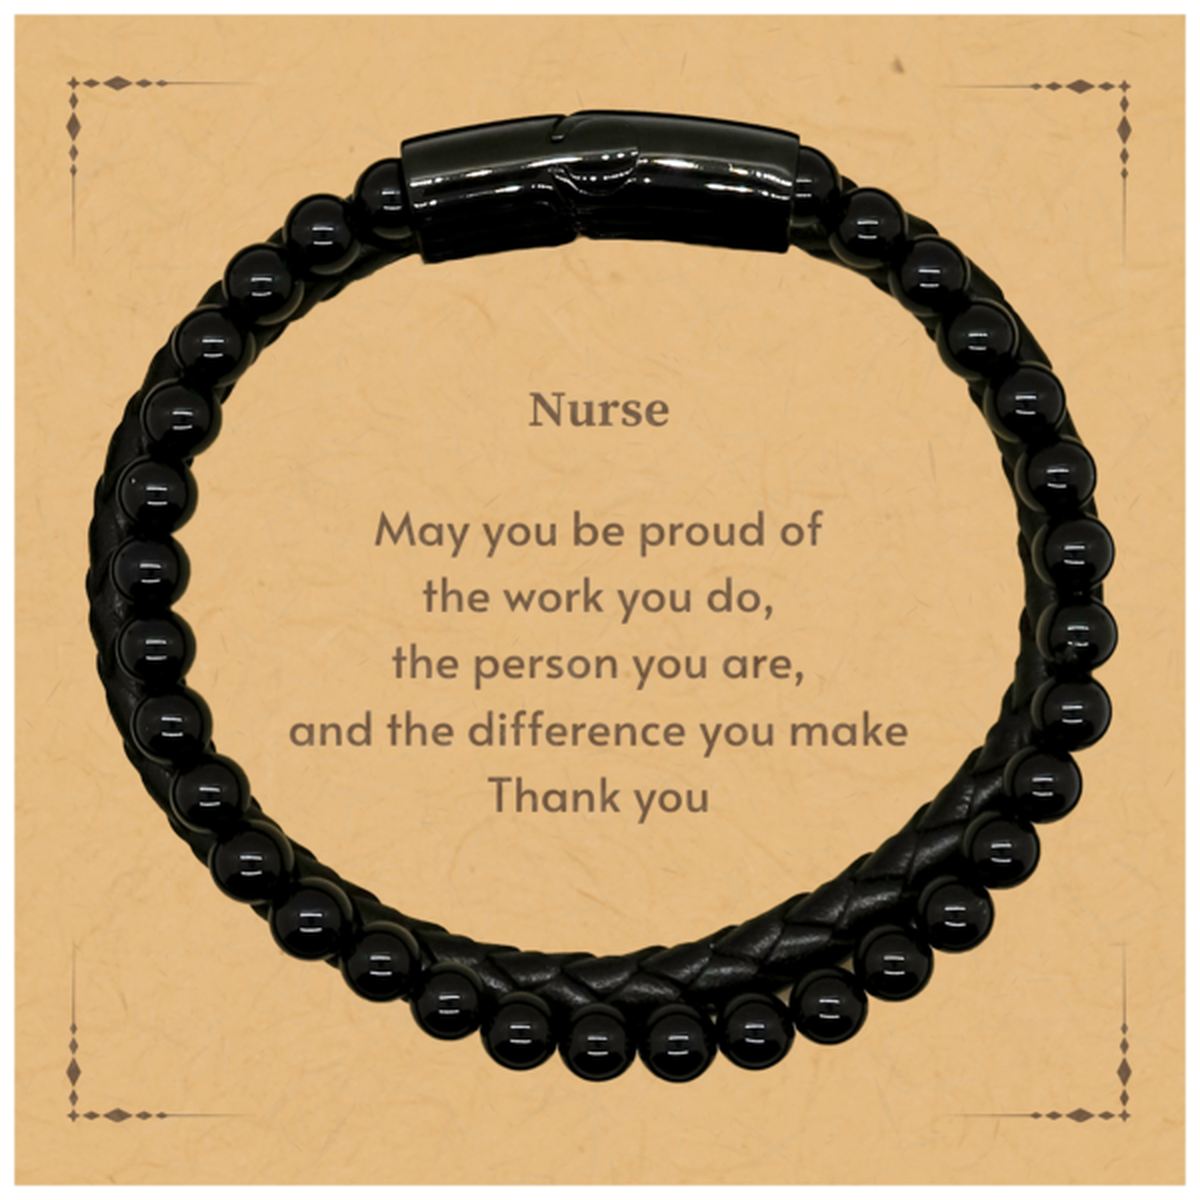 Heartwarming Stone Leather Bracelets Retirement Coworkers Gifts for Nurse, Nurse May You be proud of the work you do, the person you are Gifts for Boss Men Women Friends